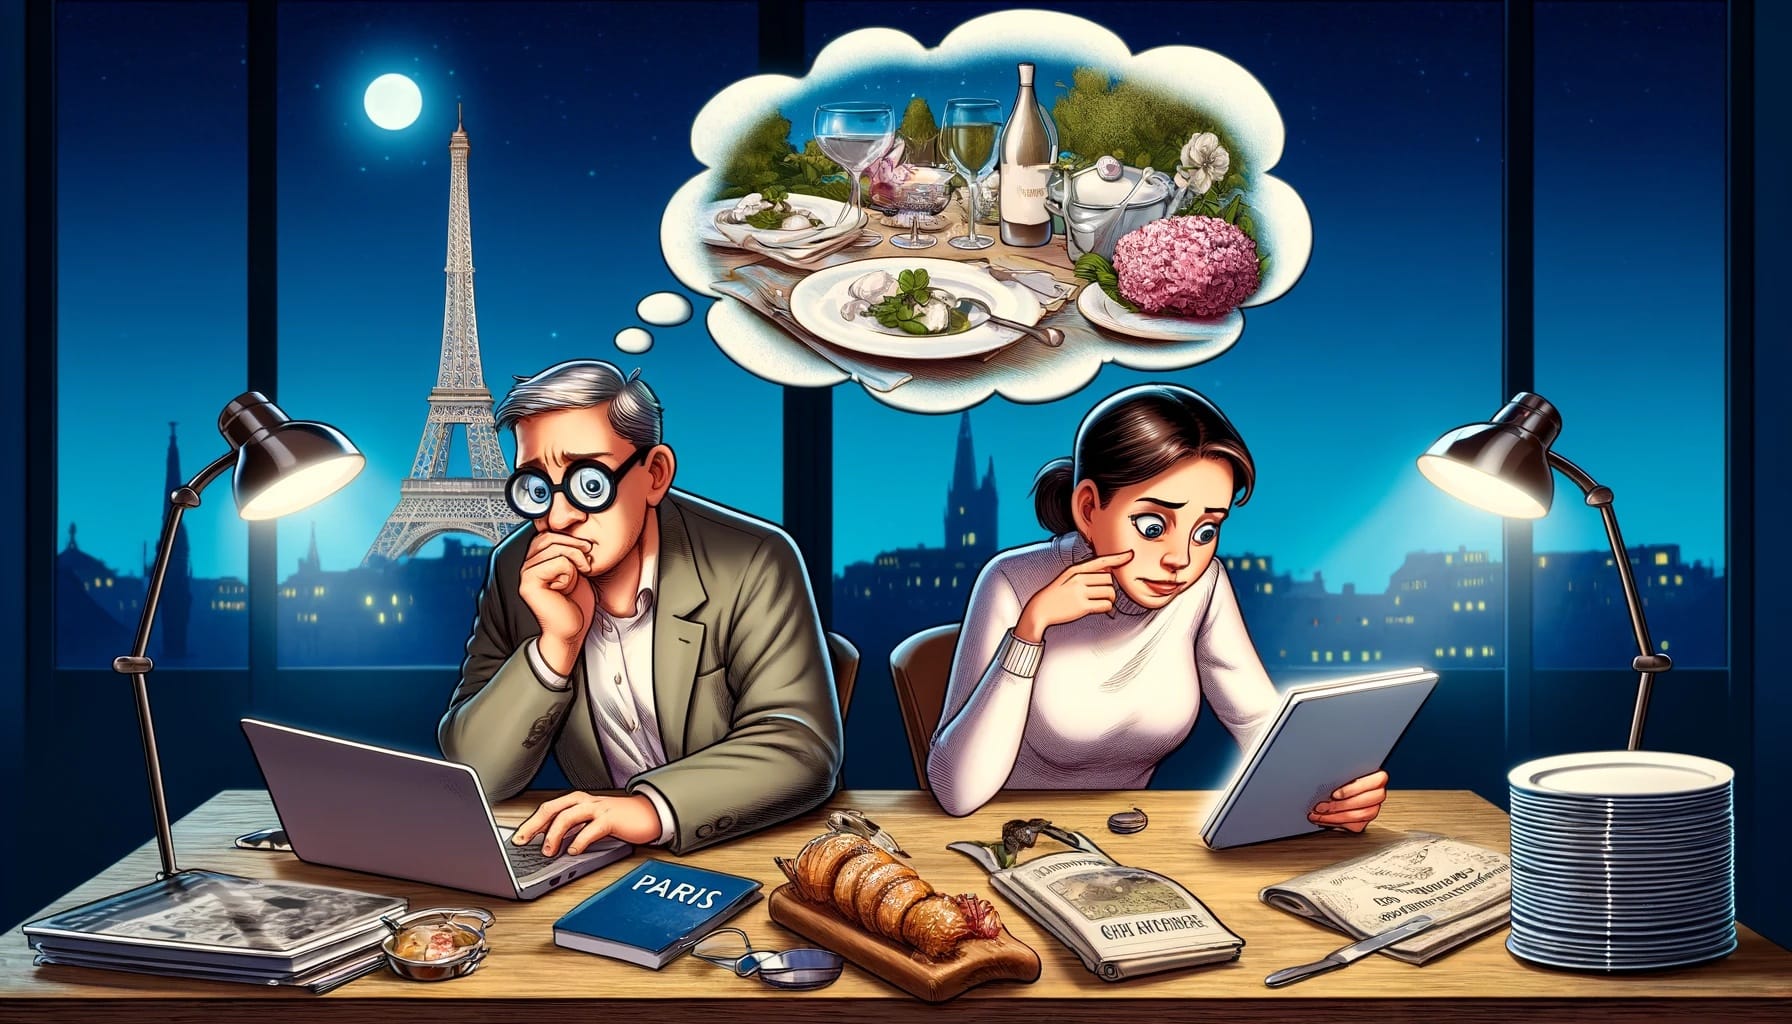 Exhausted couple planning Paris trip late at night with Paris travel guides scattered around, woman dreaming of a luxurious gourmet dinner with Eiffel Tower view, illustrating travel research and aspirations. Looking at how to choose the right food tour